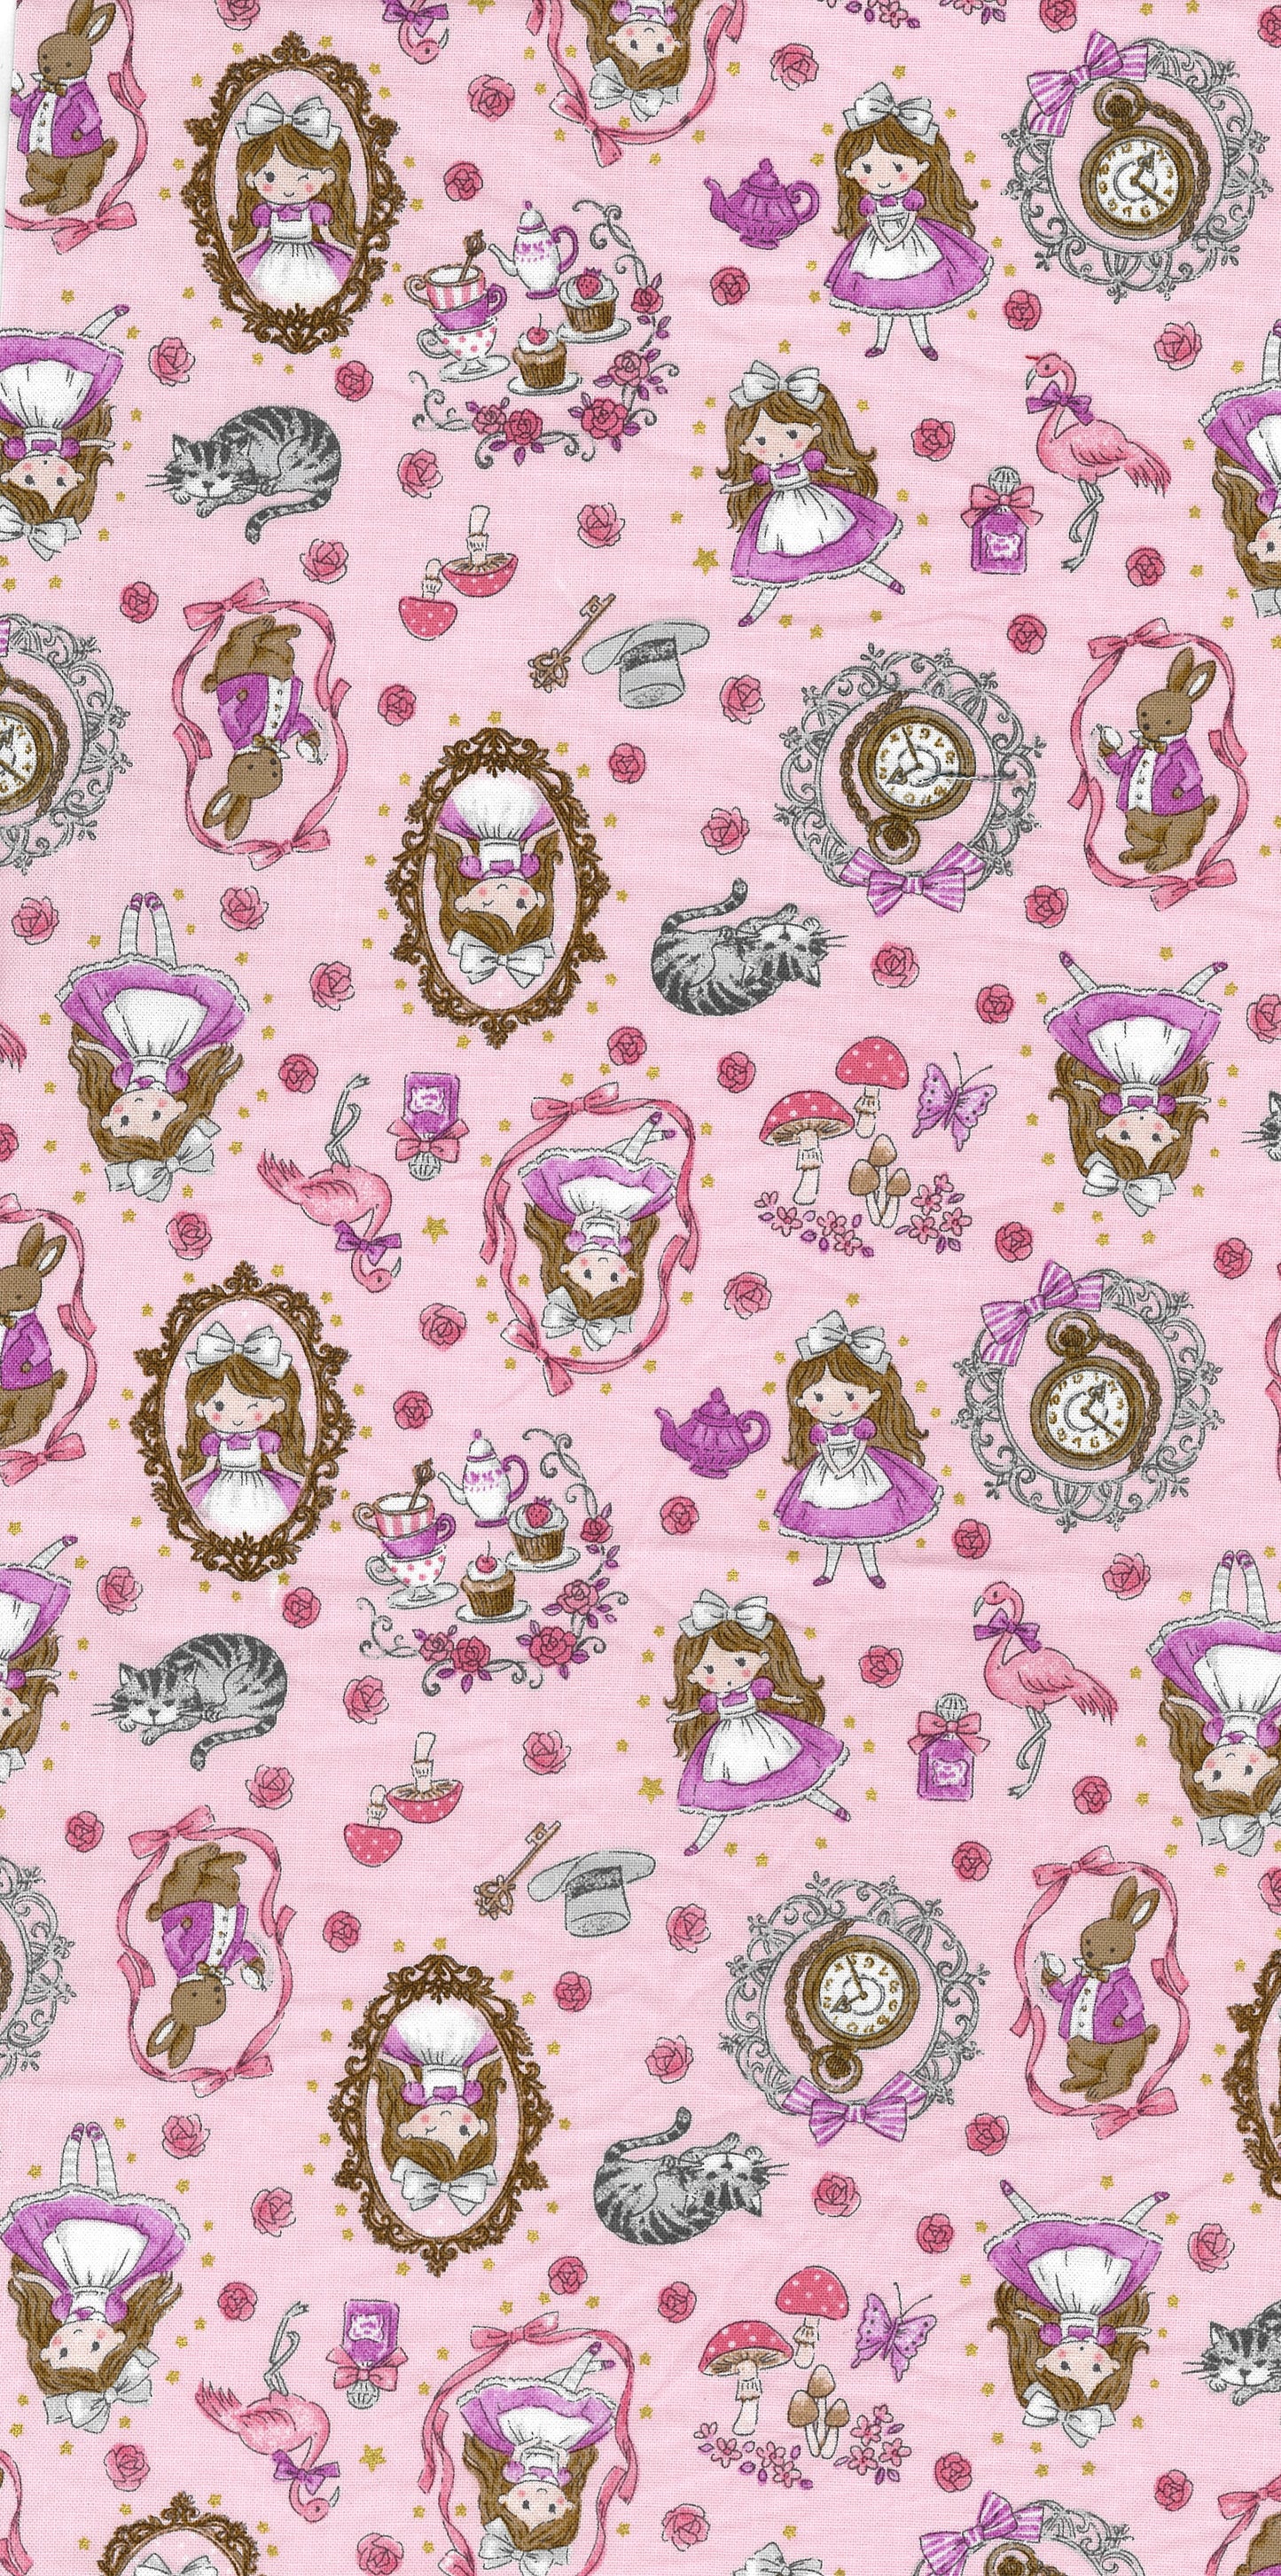 Fairy Tale Alice in Wonderland Sheeting YPA-56010-1